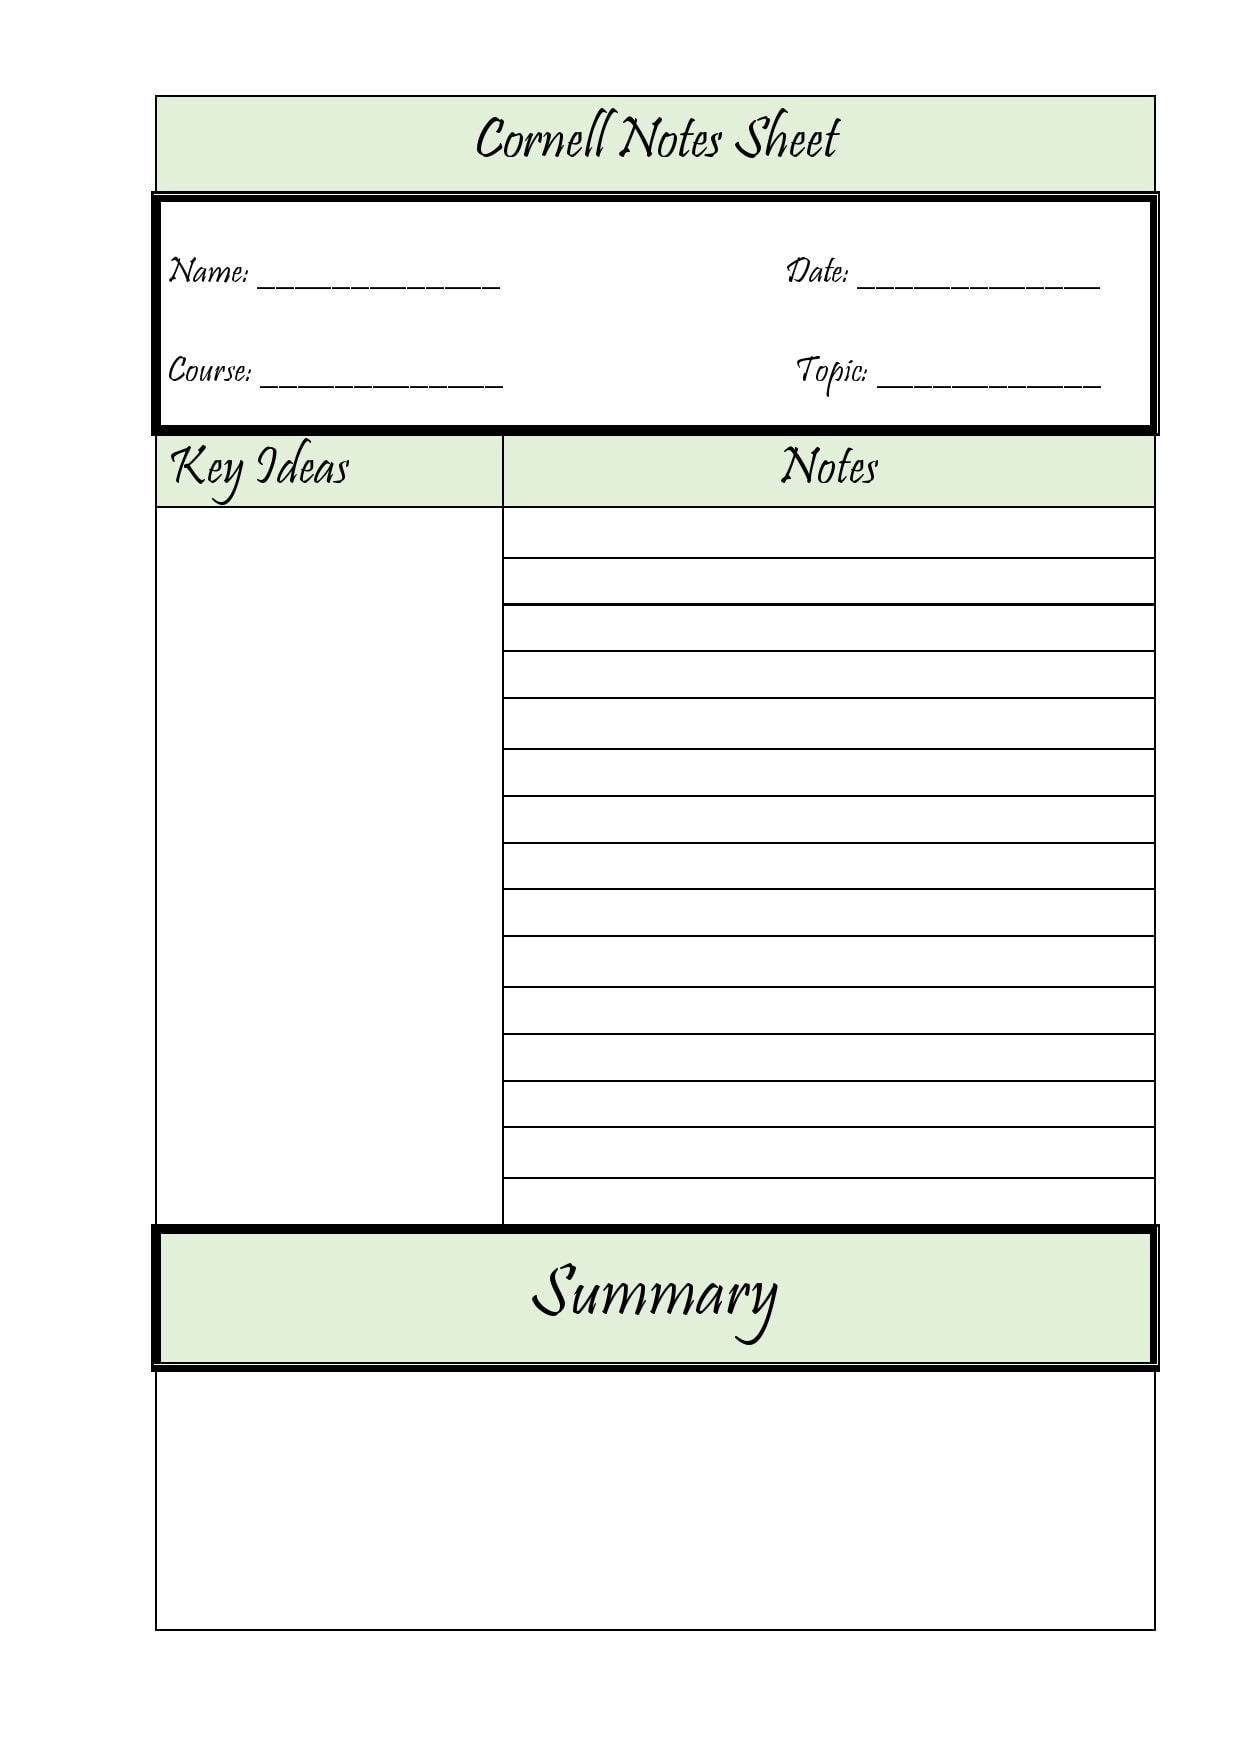 20 Printable Cornell Notes Templates [Free] - TemplateArchive Throughout Cornell Notes Template Doc